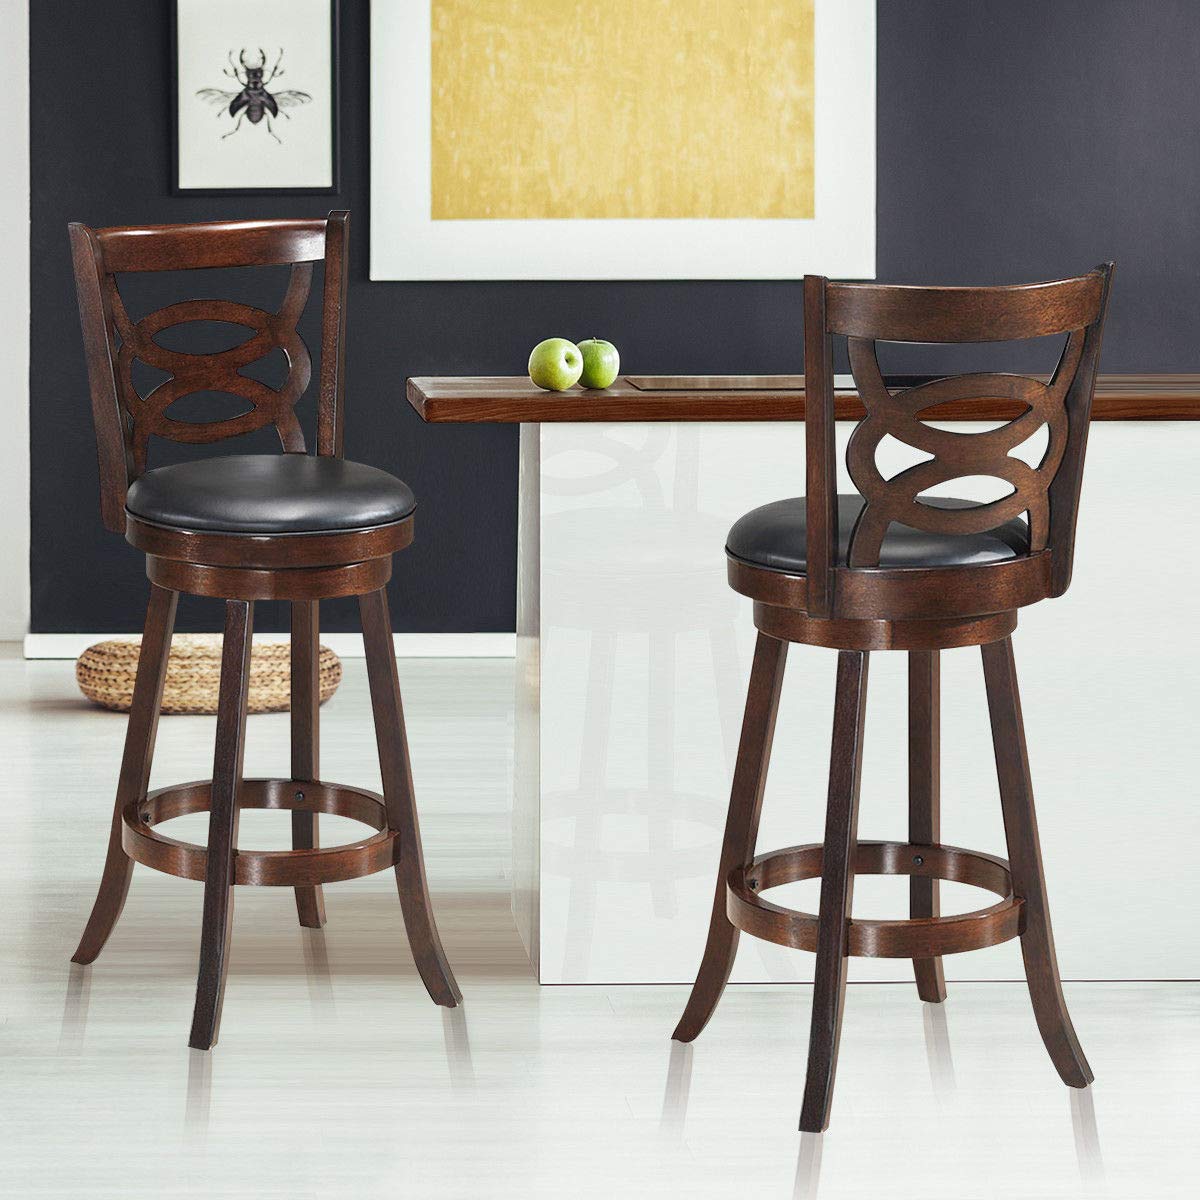 Giantex Bar Stools, Counter Height Dining Chair, Fabric Upholstered 360 Degree Swivel